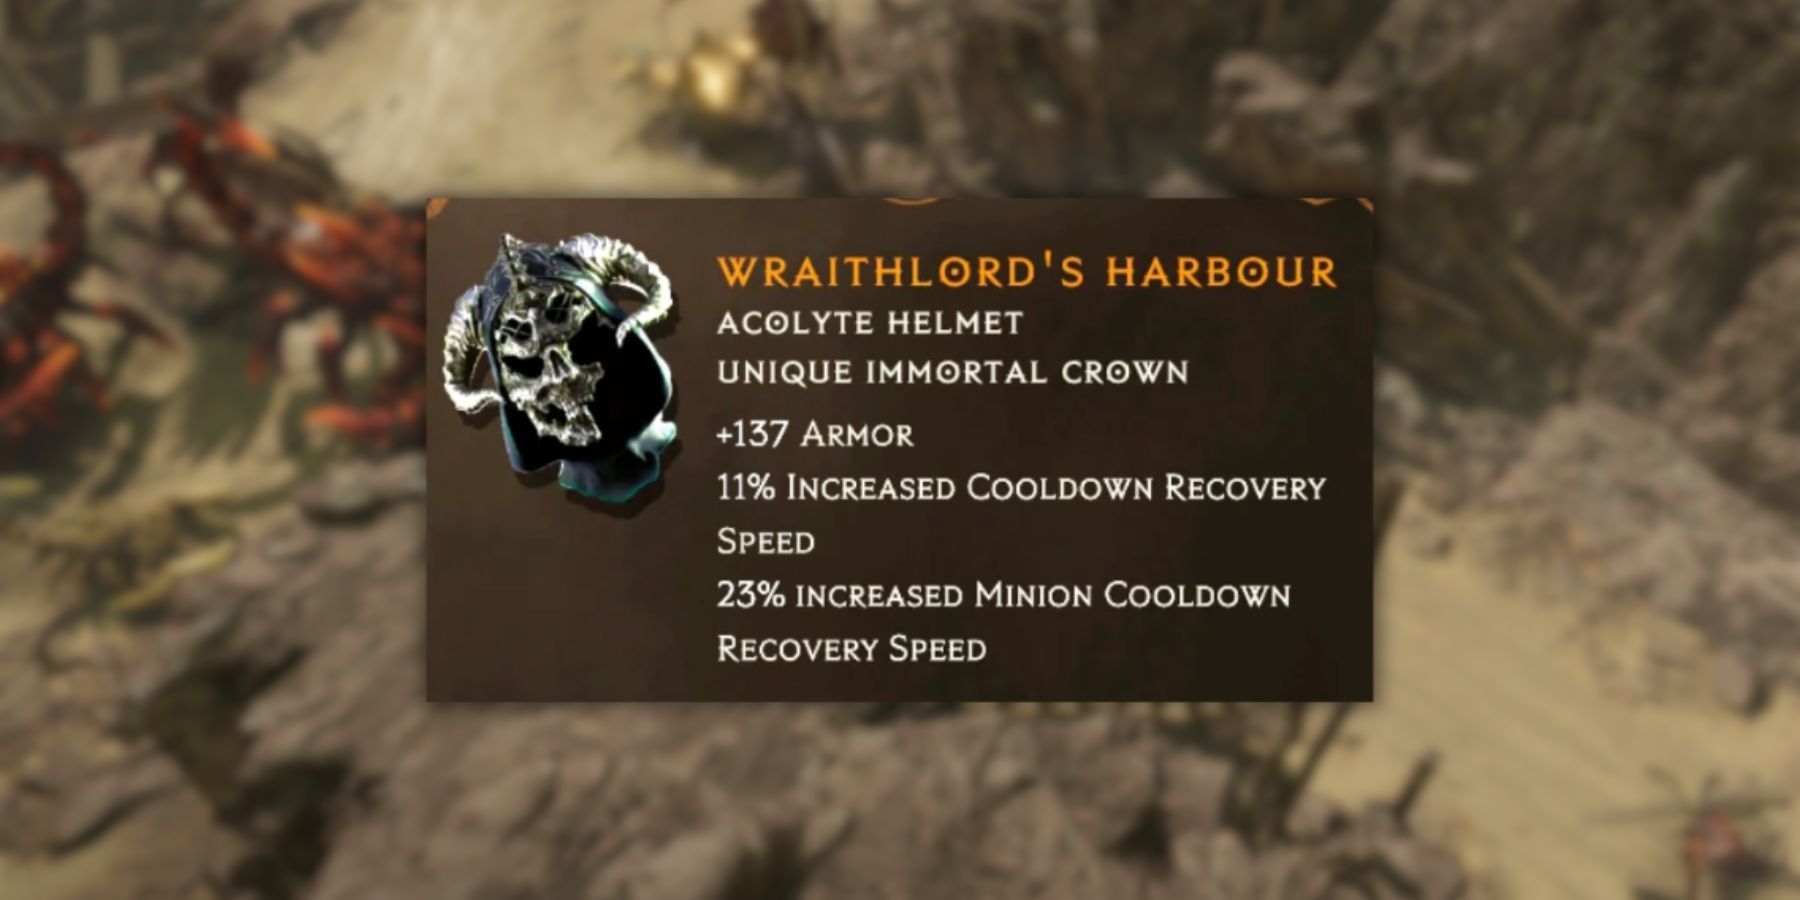 How to Get Wraithlord’s Harbour